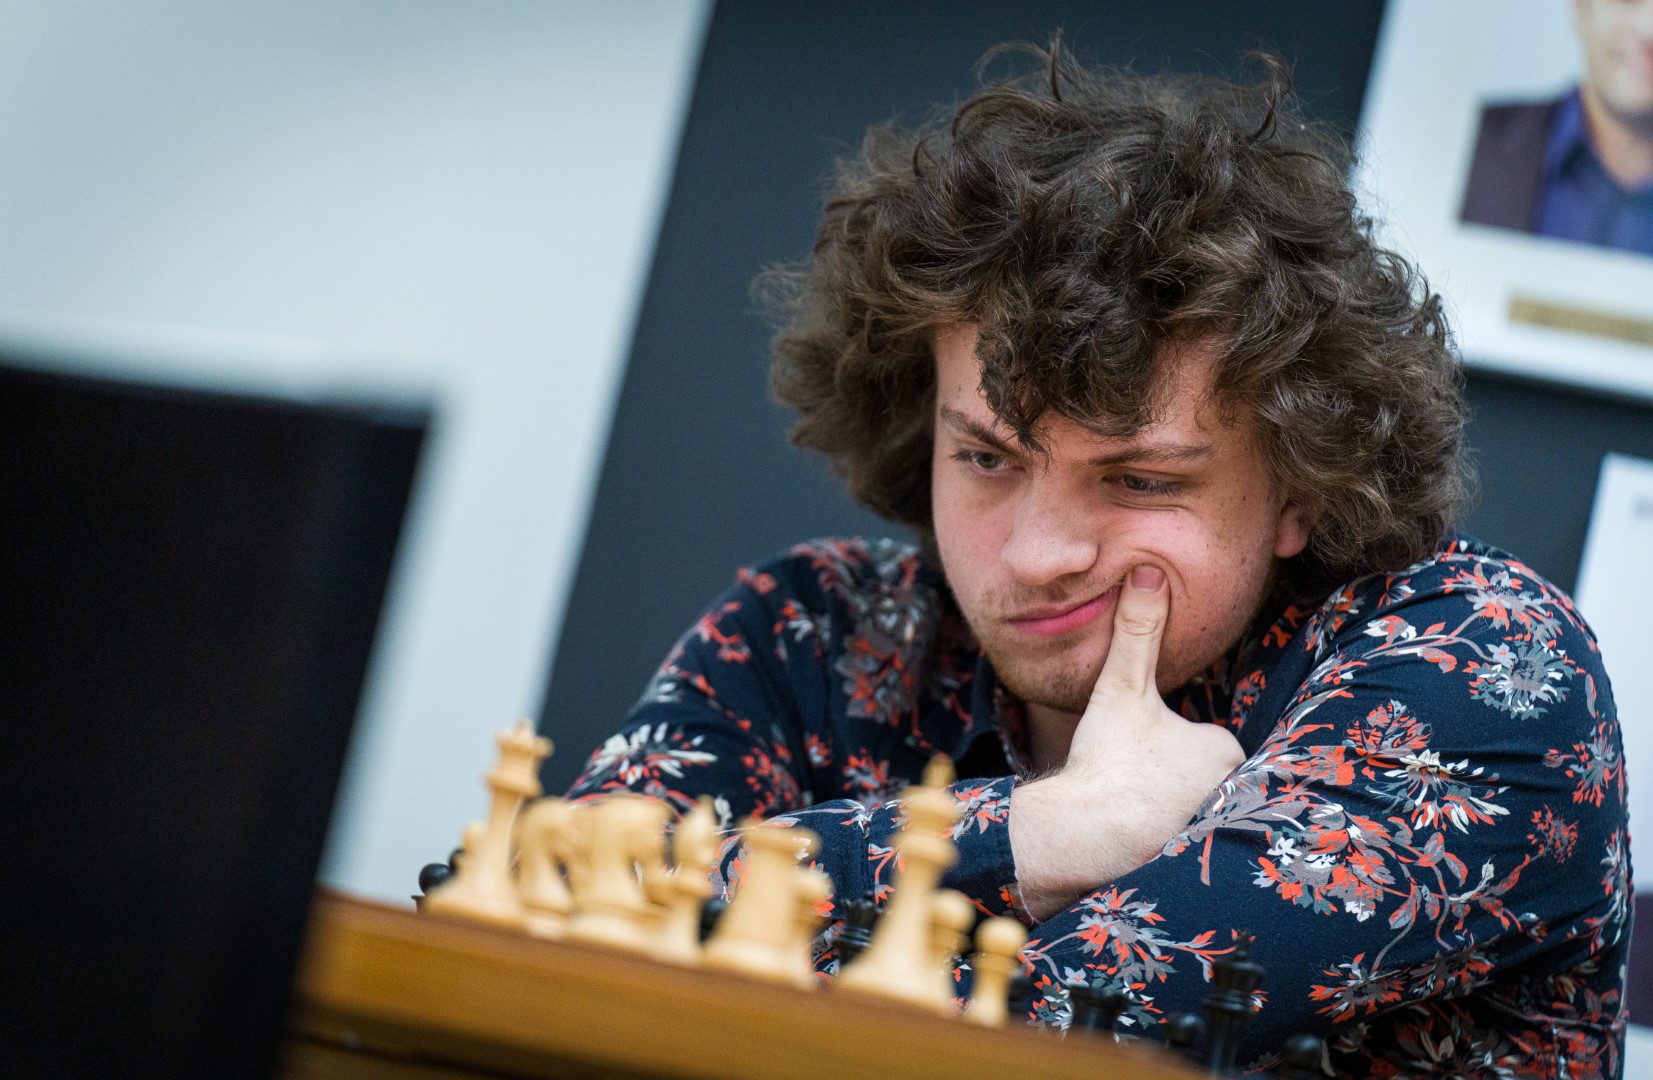 What is the highest chess rating that a non-grandmaster (GM) player can  achieve? Are there any non-GM players who can beat GMs consistently? If so,  how does he do it? Is there